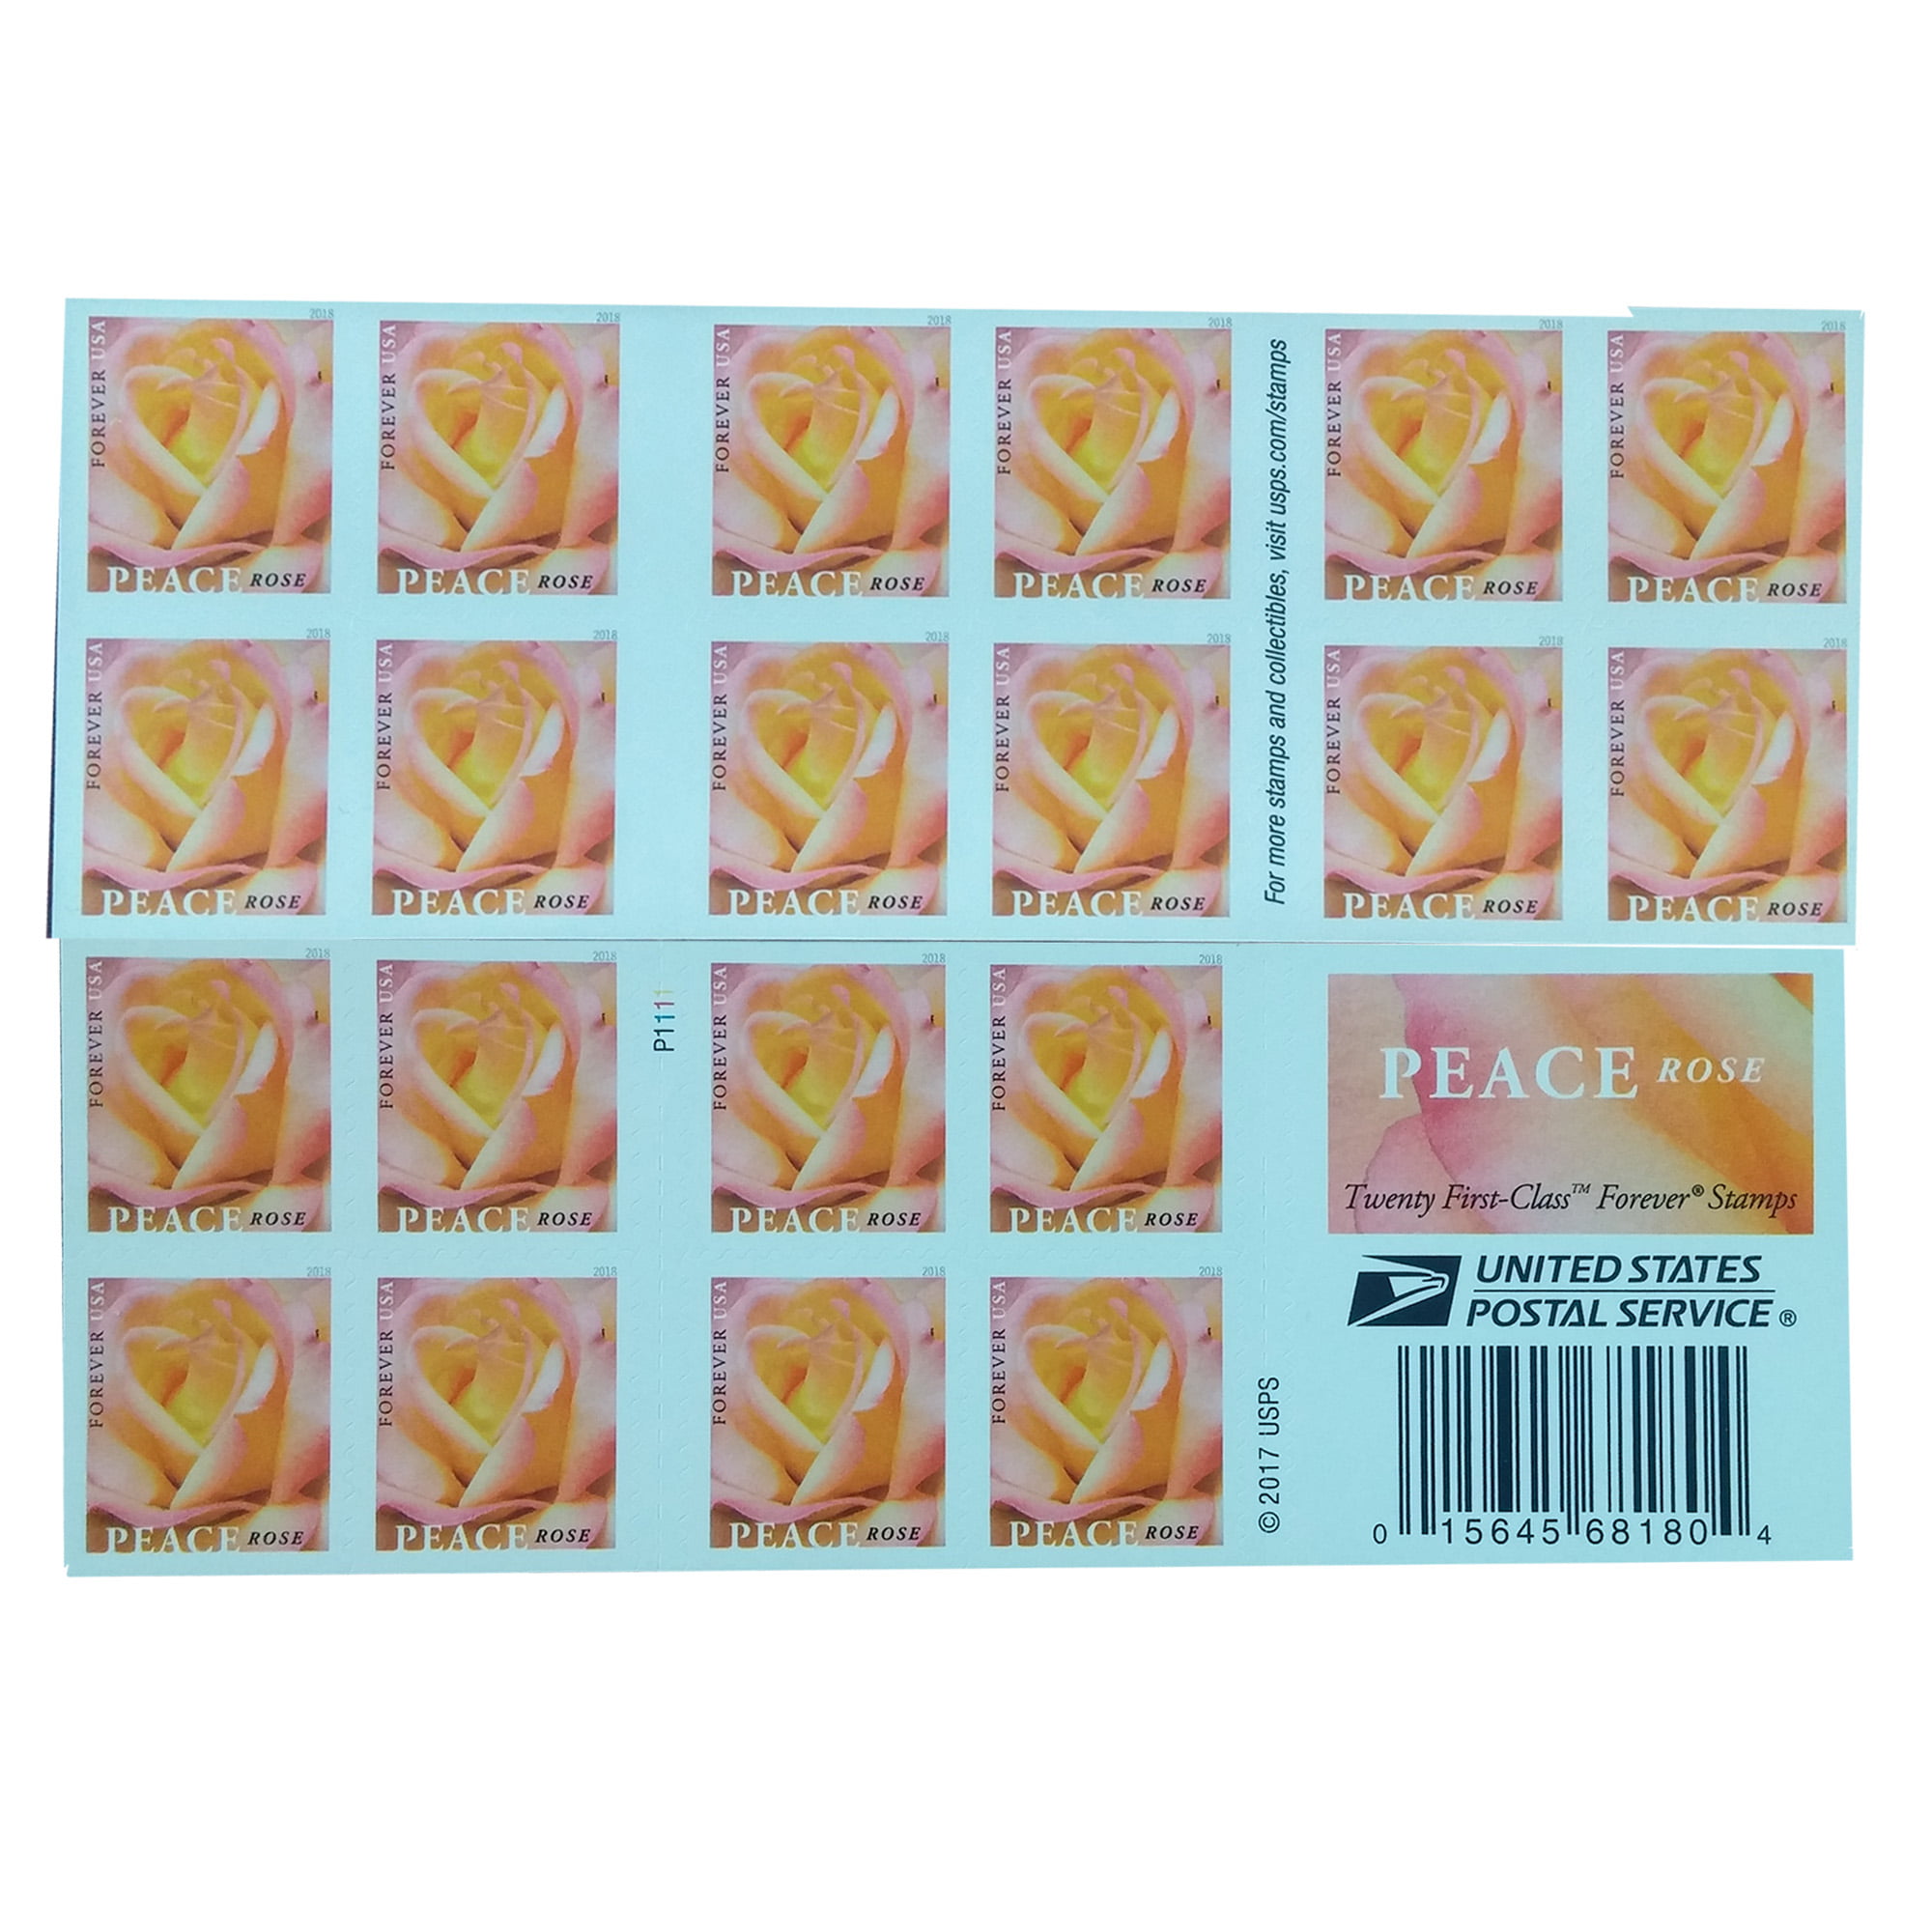 2001 Postage Stamps for Mailing Letters or Crafts and Scrapbooking Stamps Summer Fruit America Apple & Orange Booklet of 20 U.S